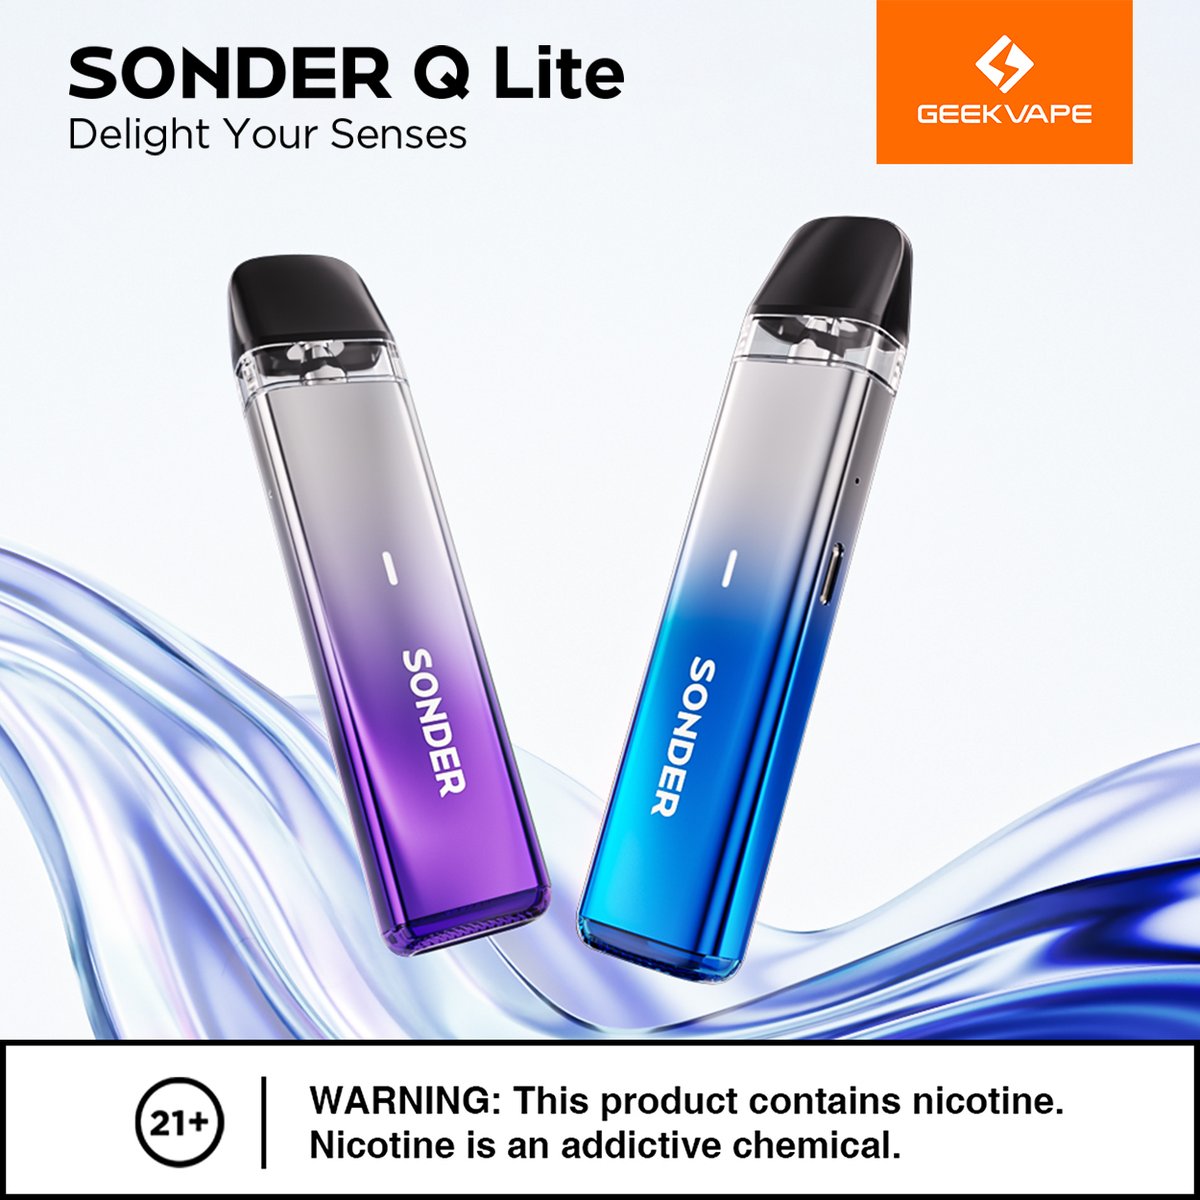 🧩Sonder Q Lite has landed! Light and delicate, it starts your taste journey instantly. For the first time on the market, your unique taste is on the move! #geekvape #sonderqlite #ExplosiveLaunch #ecigarette #stopsmokingstartvaping #dampfer #germanvapers #dampfenstattrauchen